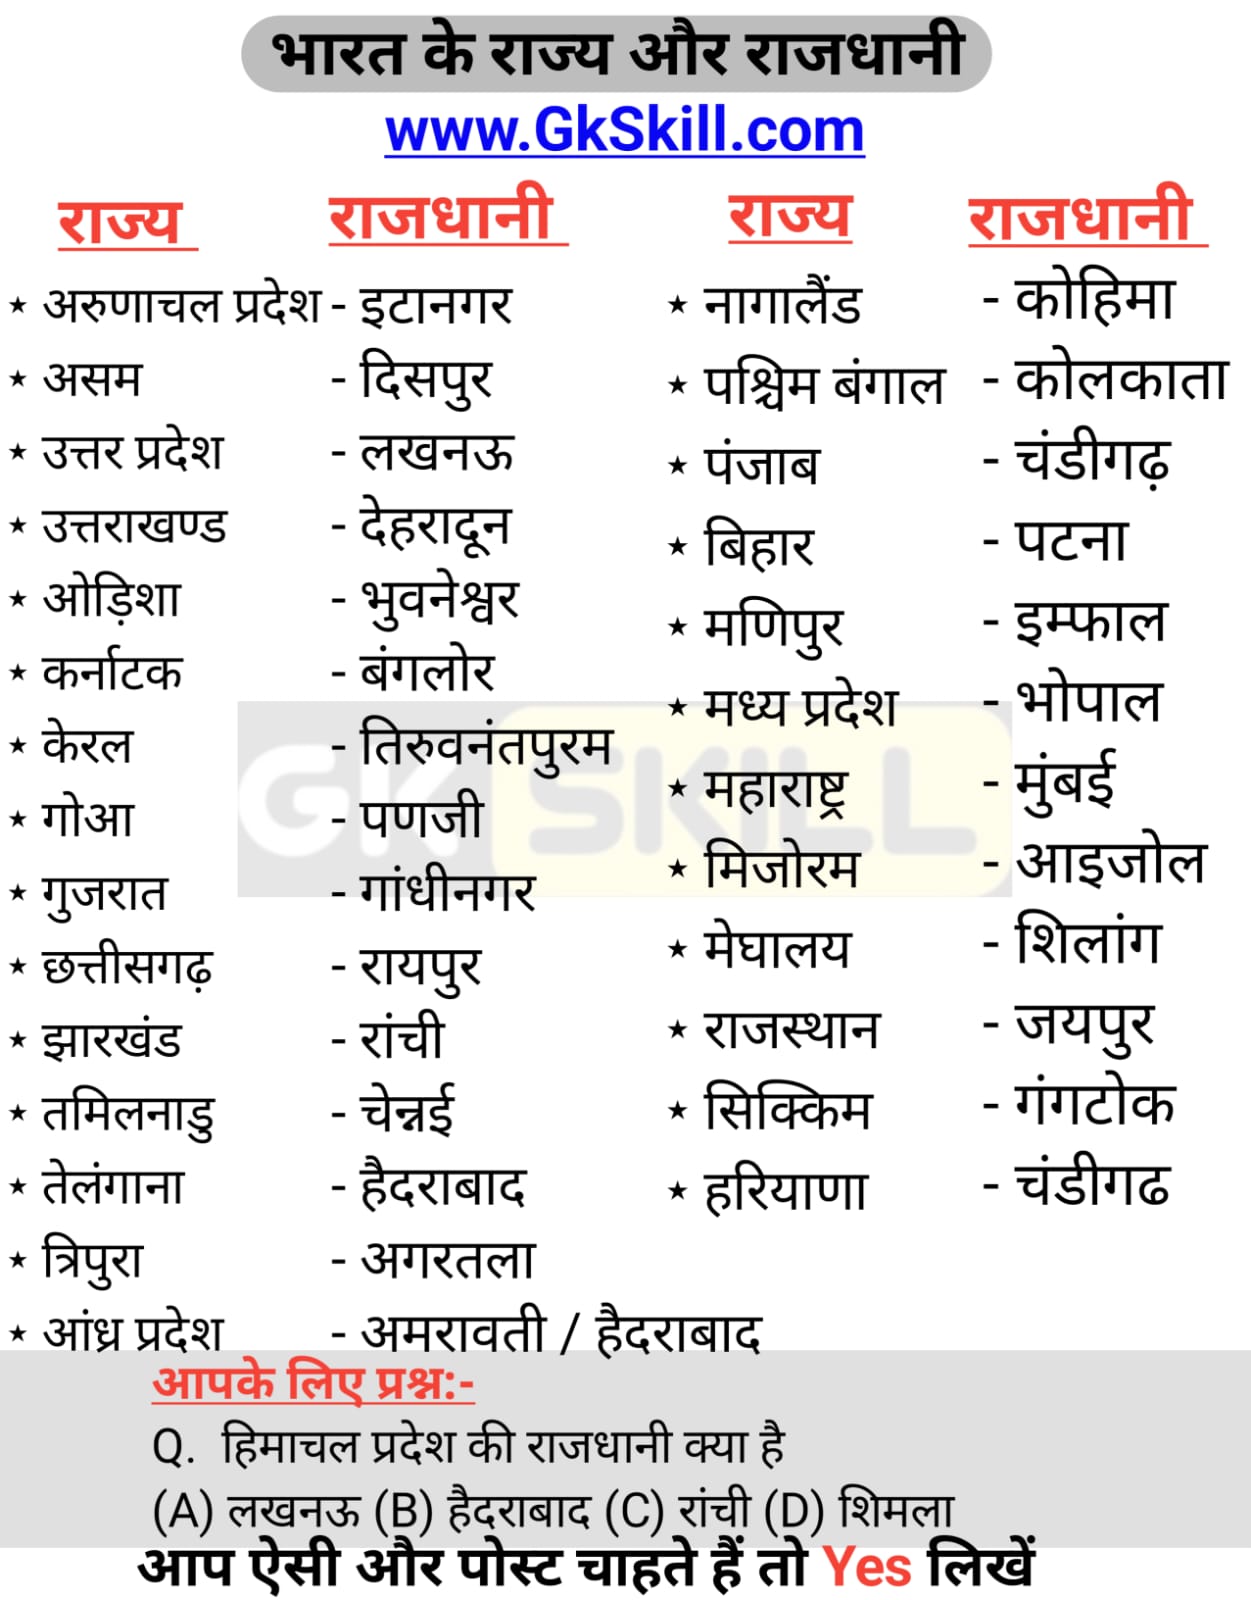 You are currently viewing Indian states and their capitals | भारत के राज्य और उनकी राजधानियाँ